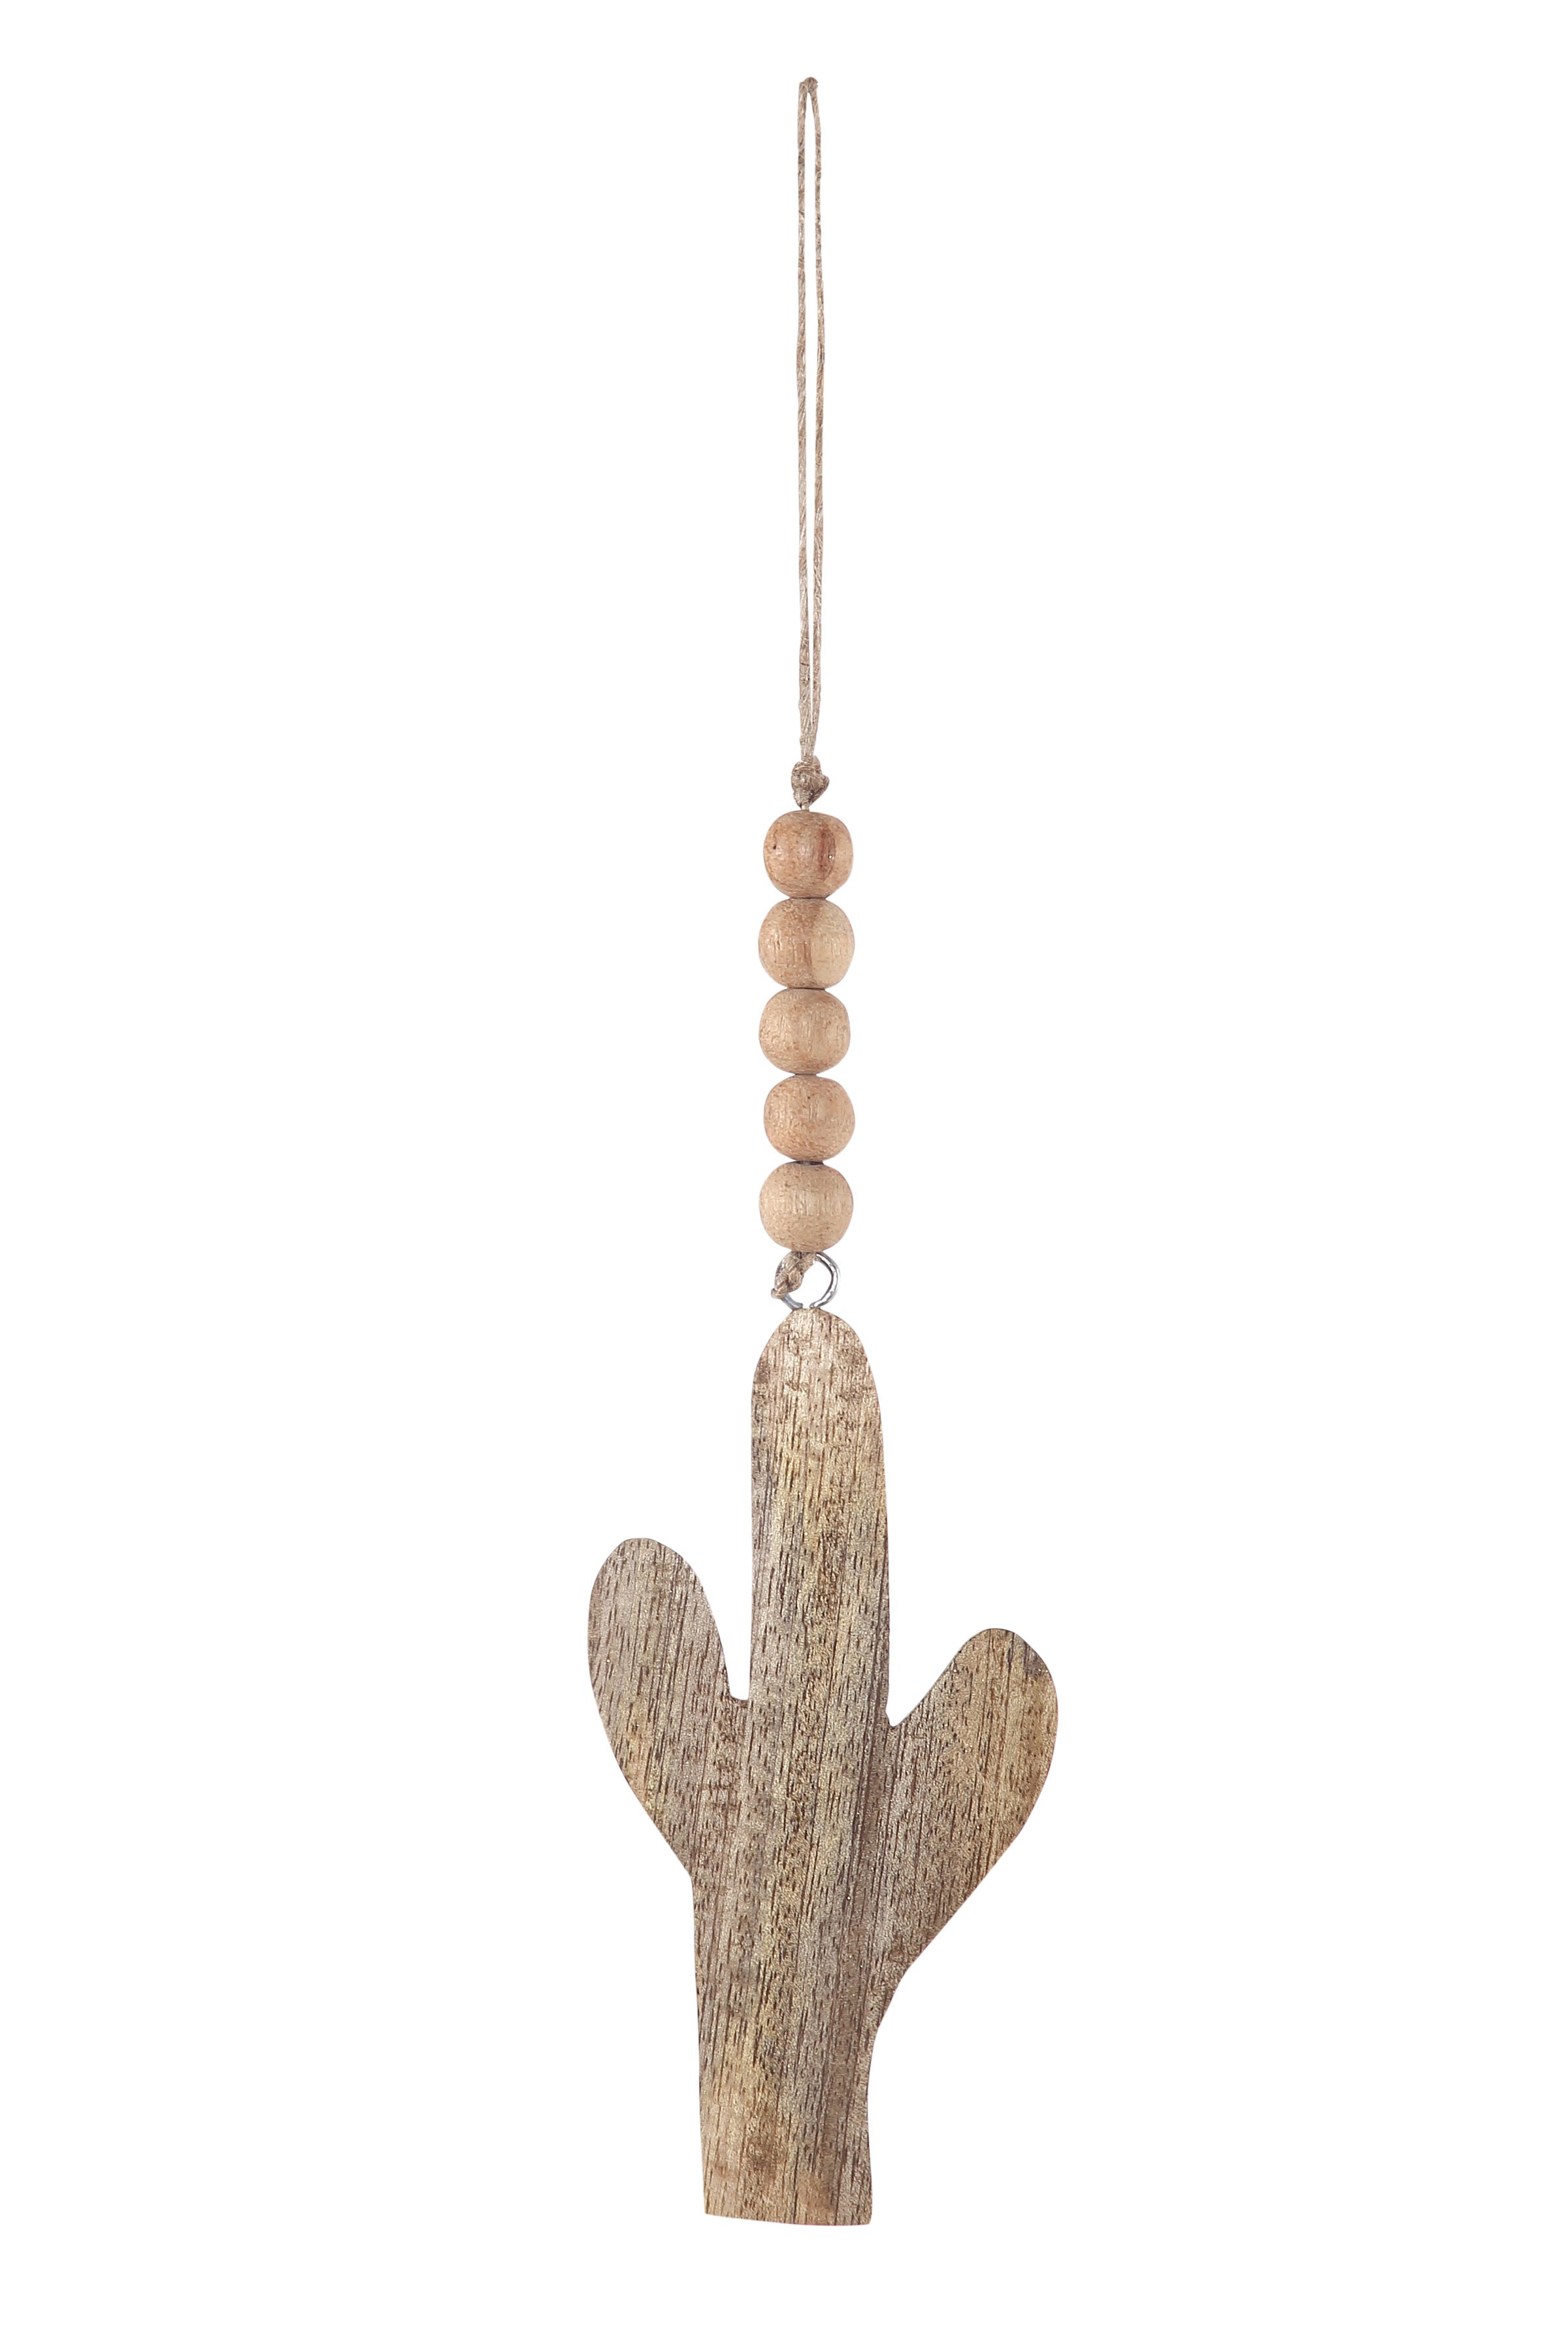 Handmade Wood Christmas Ornament - Cactus - 11 inches (Set of 3)